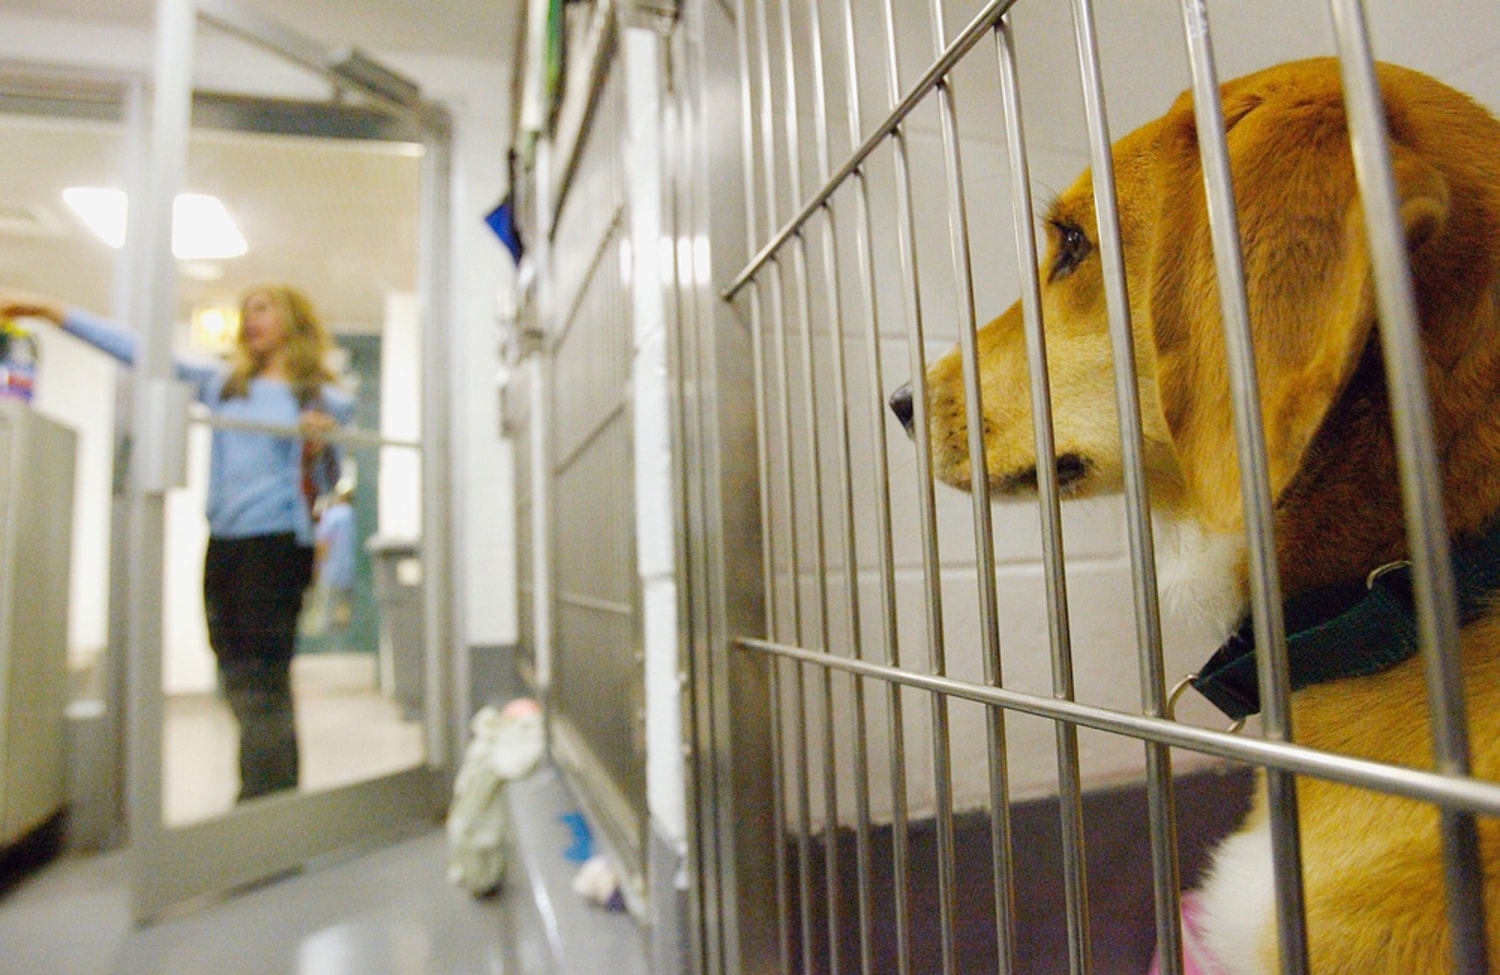 No-kill shelter nation? Maybe in 5 years